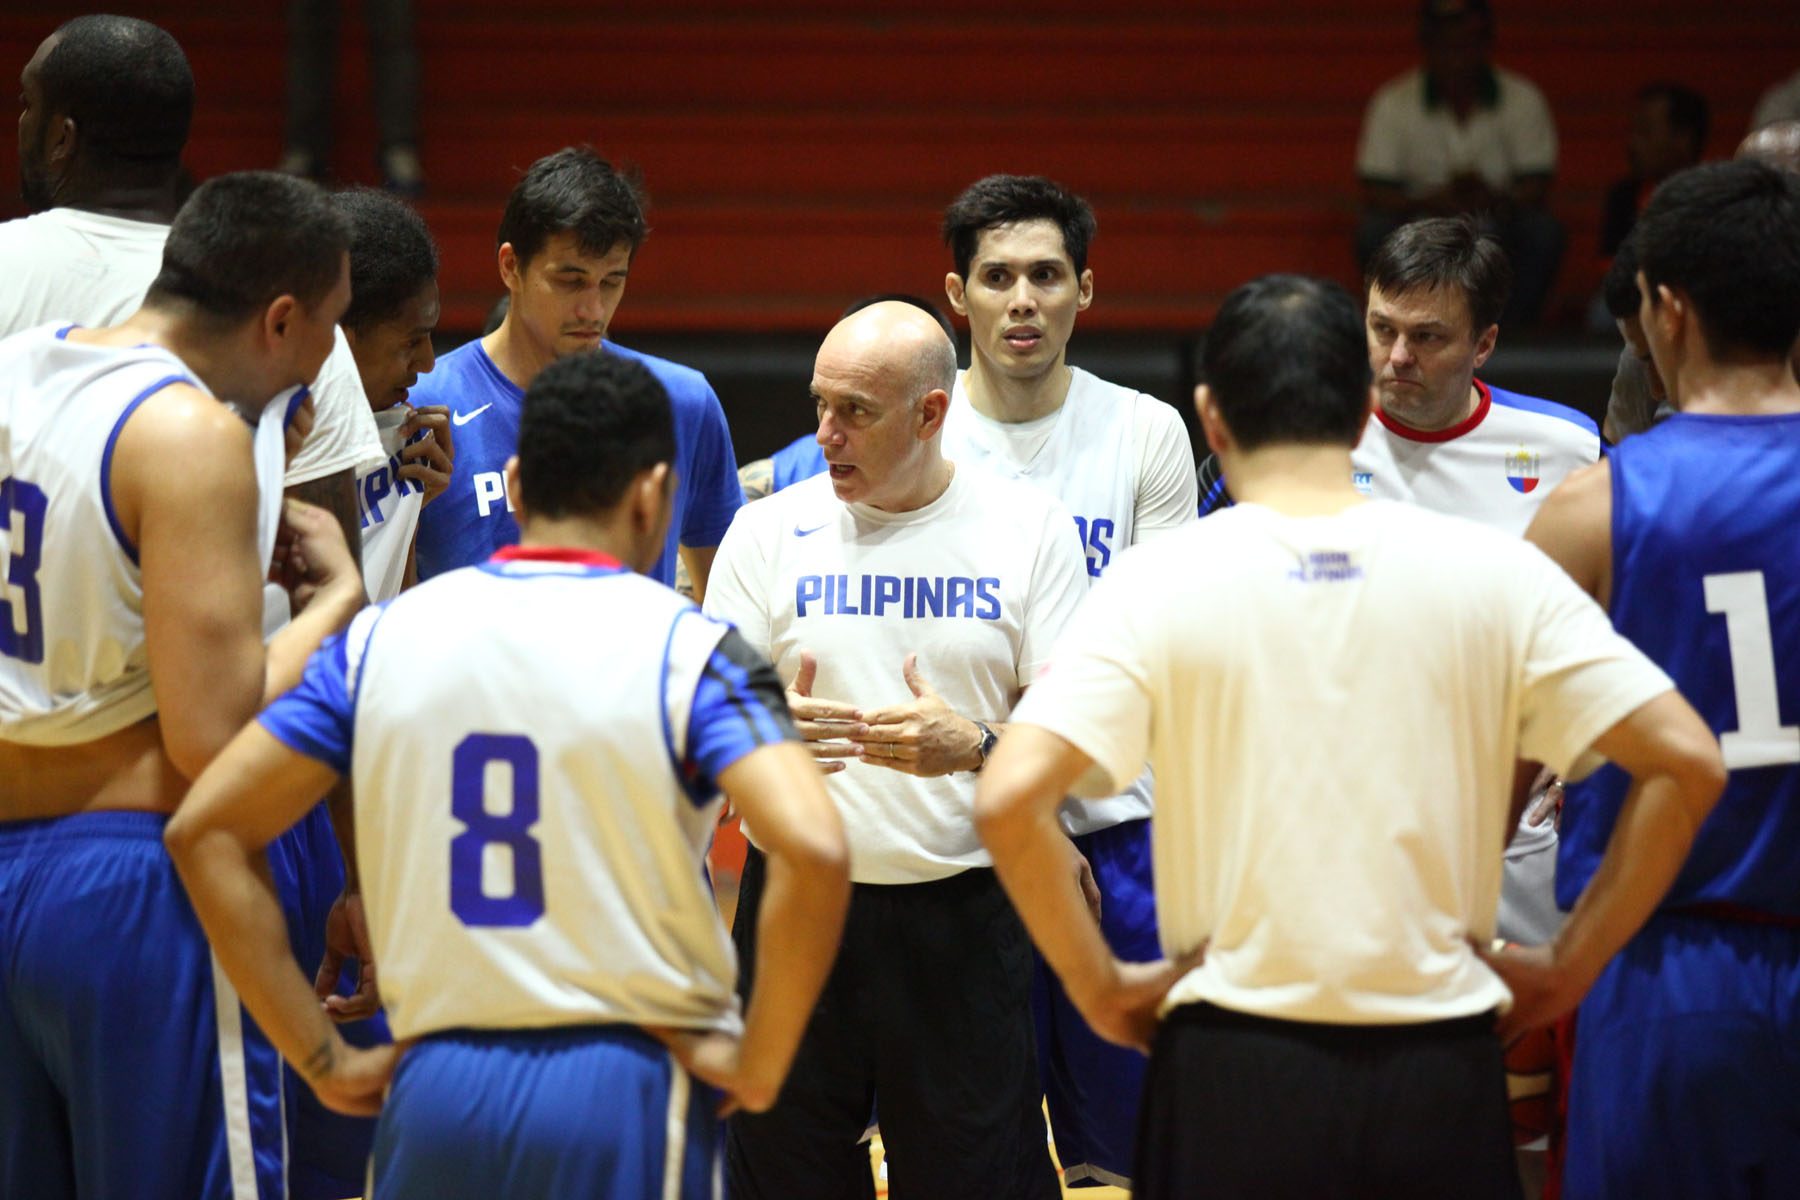 Salud on Gilas line-up issues: ‘It’s a waste to point fingers’